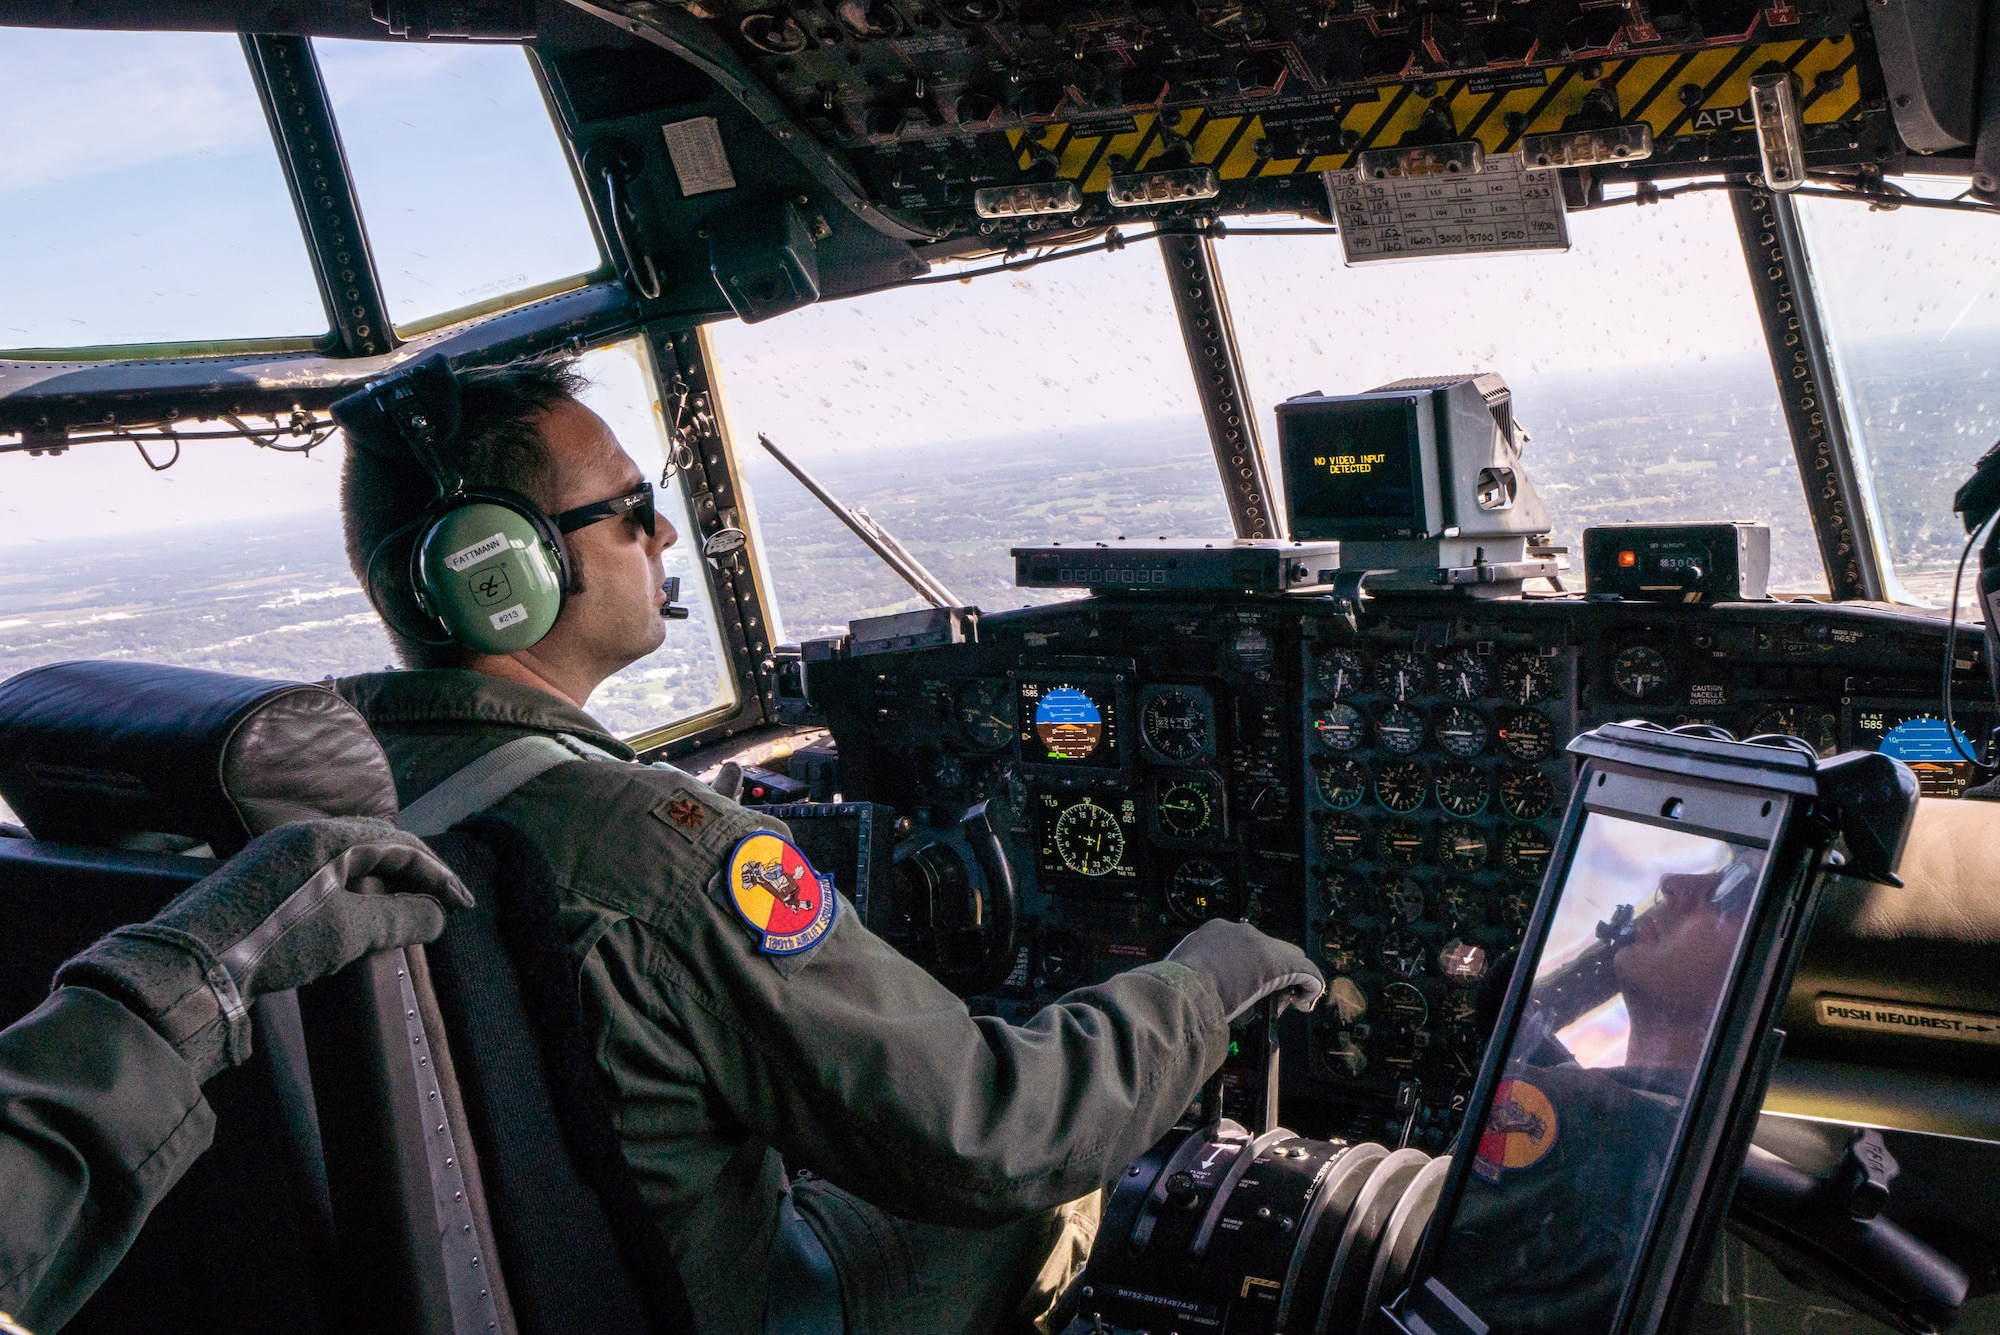 U.S. Air Force Maj. Ed Fattmann, a pilot assigned to the 180th Airlift Squadron, Missouri Air National Guard, takes his first flight as an aircraft commander with one eye, above St. Joseph, Missouri, Sept. 4, 2019. Fattman has been a pilot with the 180th AS since 2009, but was put on ‘duty not including flying’, status after losing sight in his right eye from a firework misfire in 2012. For his first flight back in military status, he flew with his original crew from his first deployment to Afghanistan in 2010. (U.S. Air National Guard photo by Tech. Sgt. Patrick Evenson)